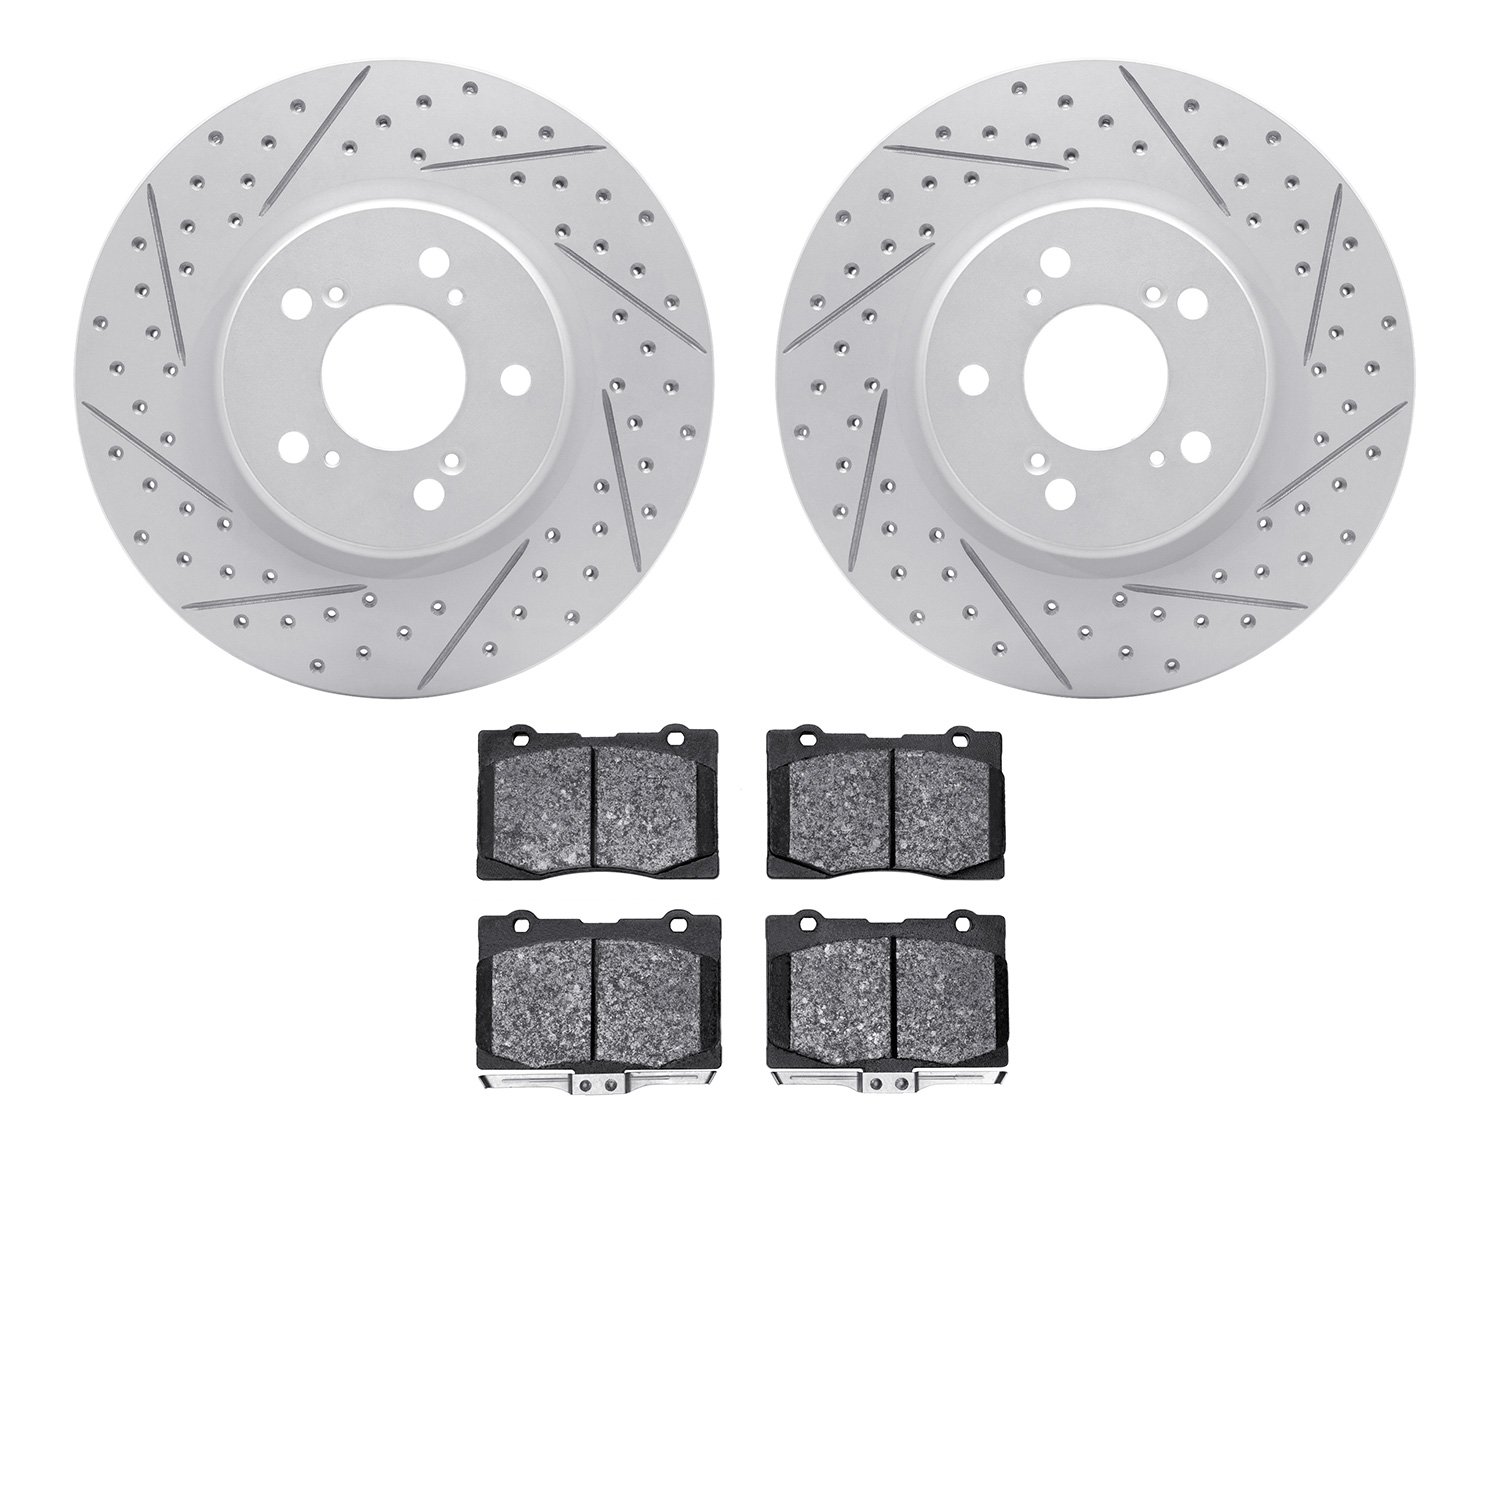 2502-58016 Geoperformance Drilled/Slotted Rotors w/5000 Advanced Brake Pads Kit, 2005-2012 Acura/Honda, Position: Front